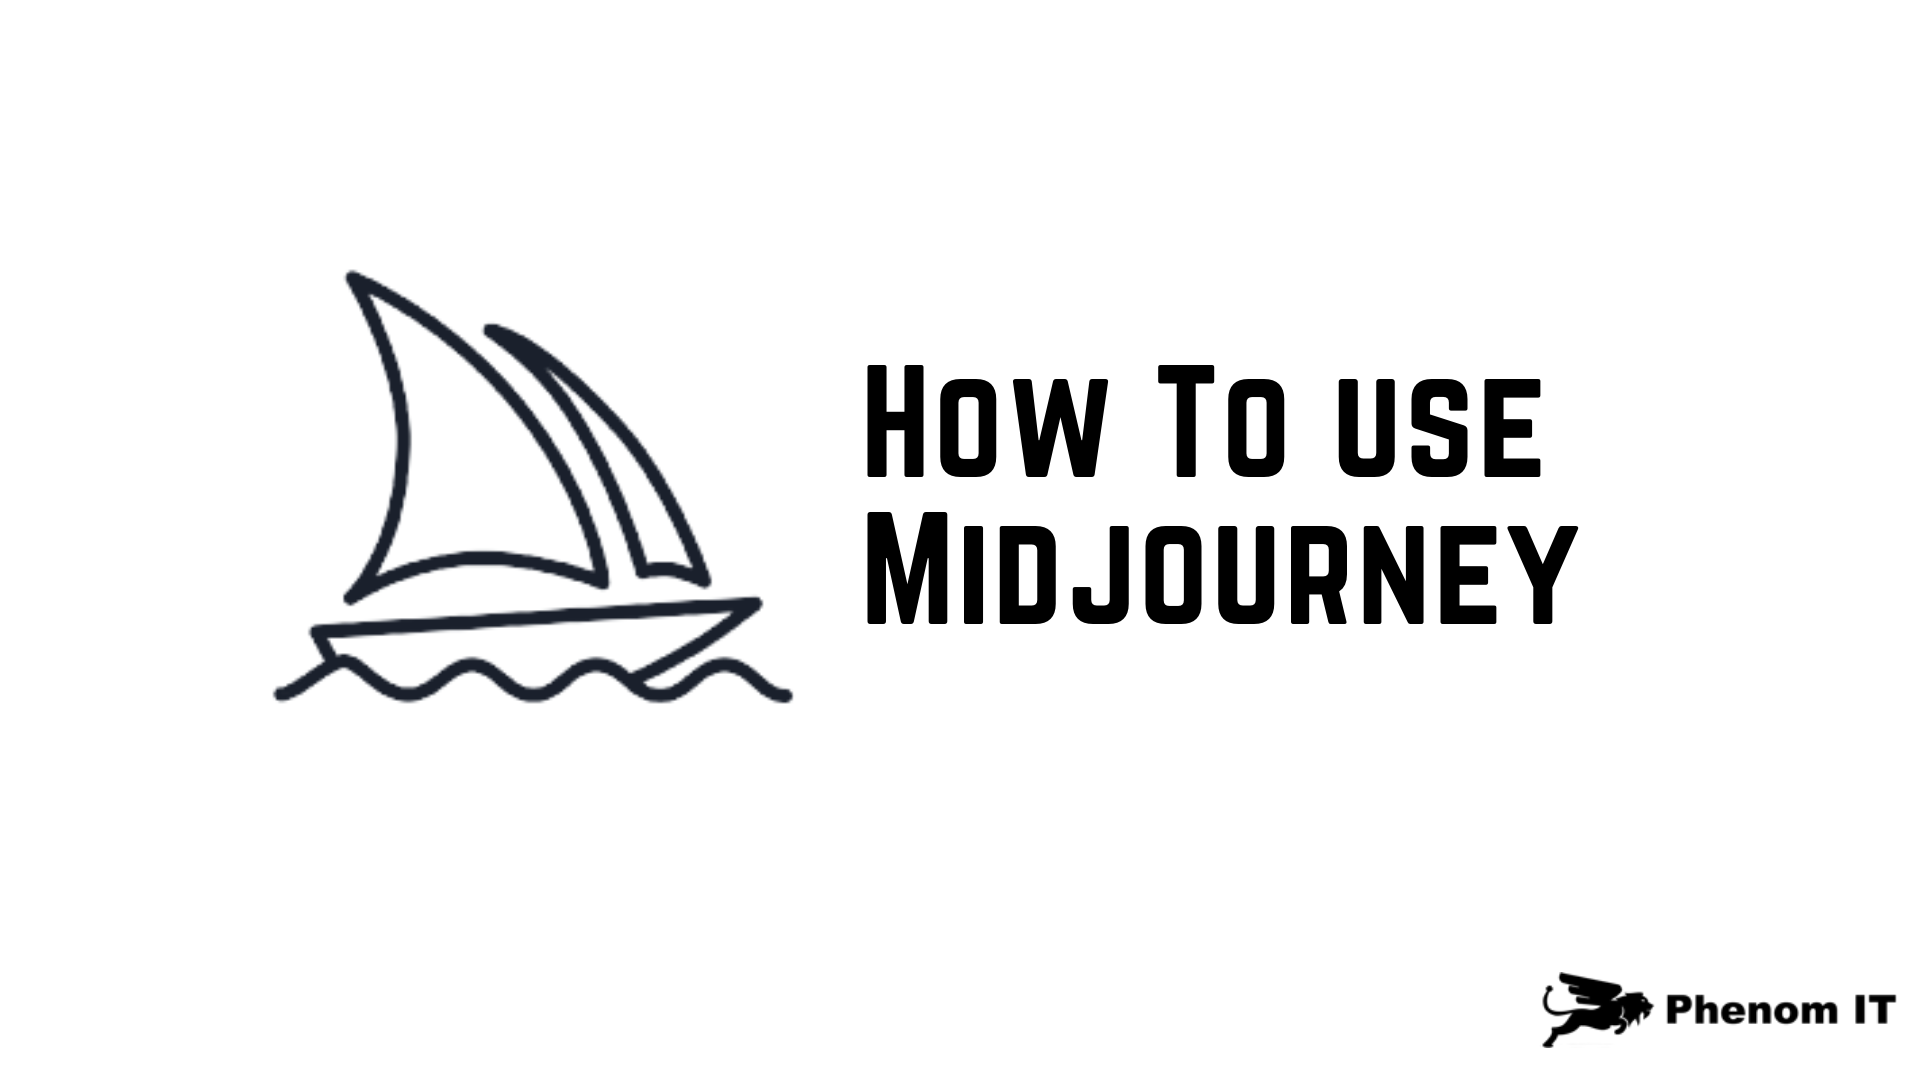 How To use Midjourney